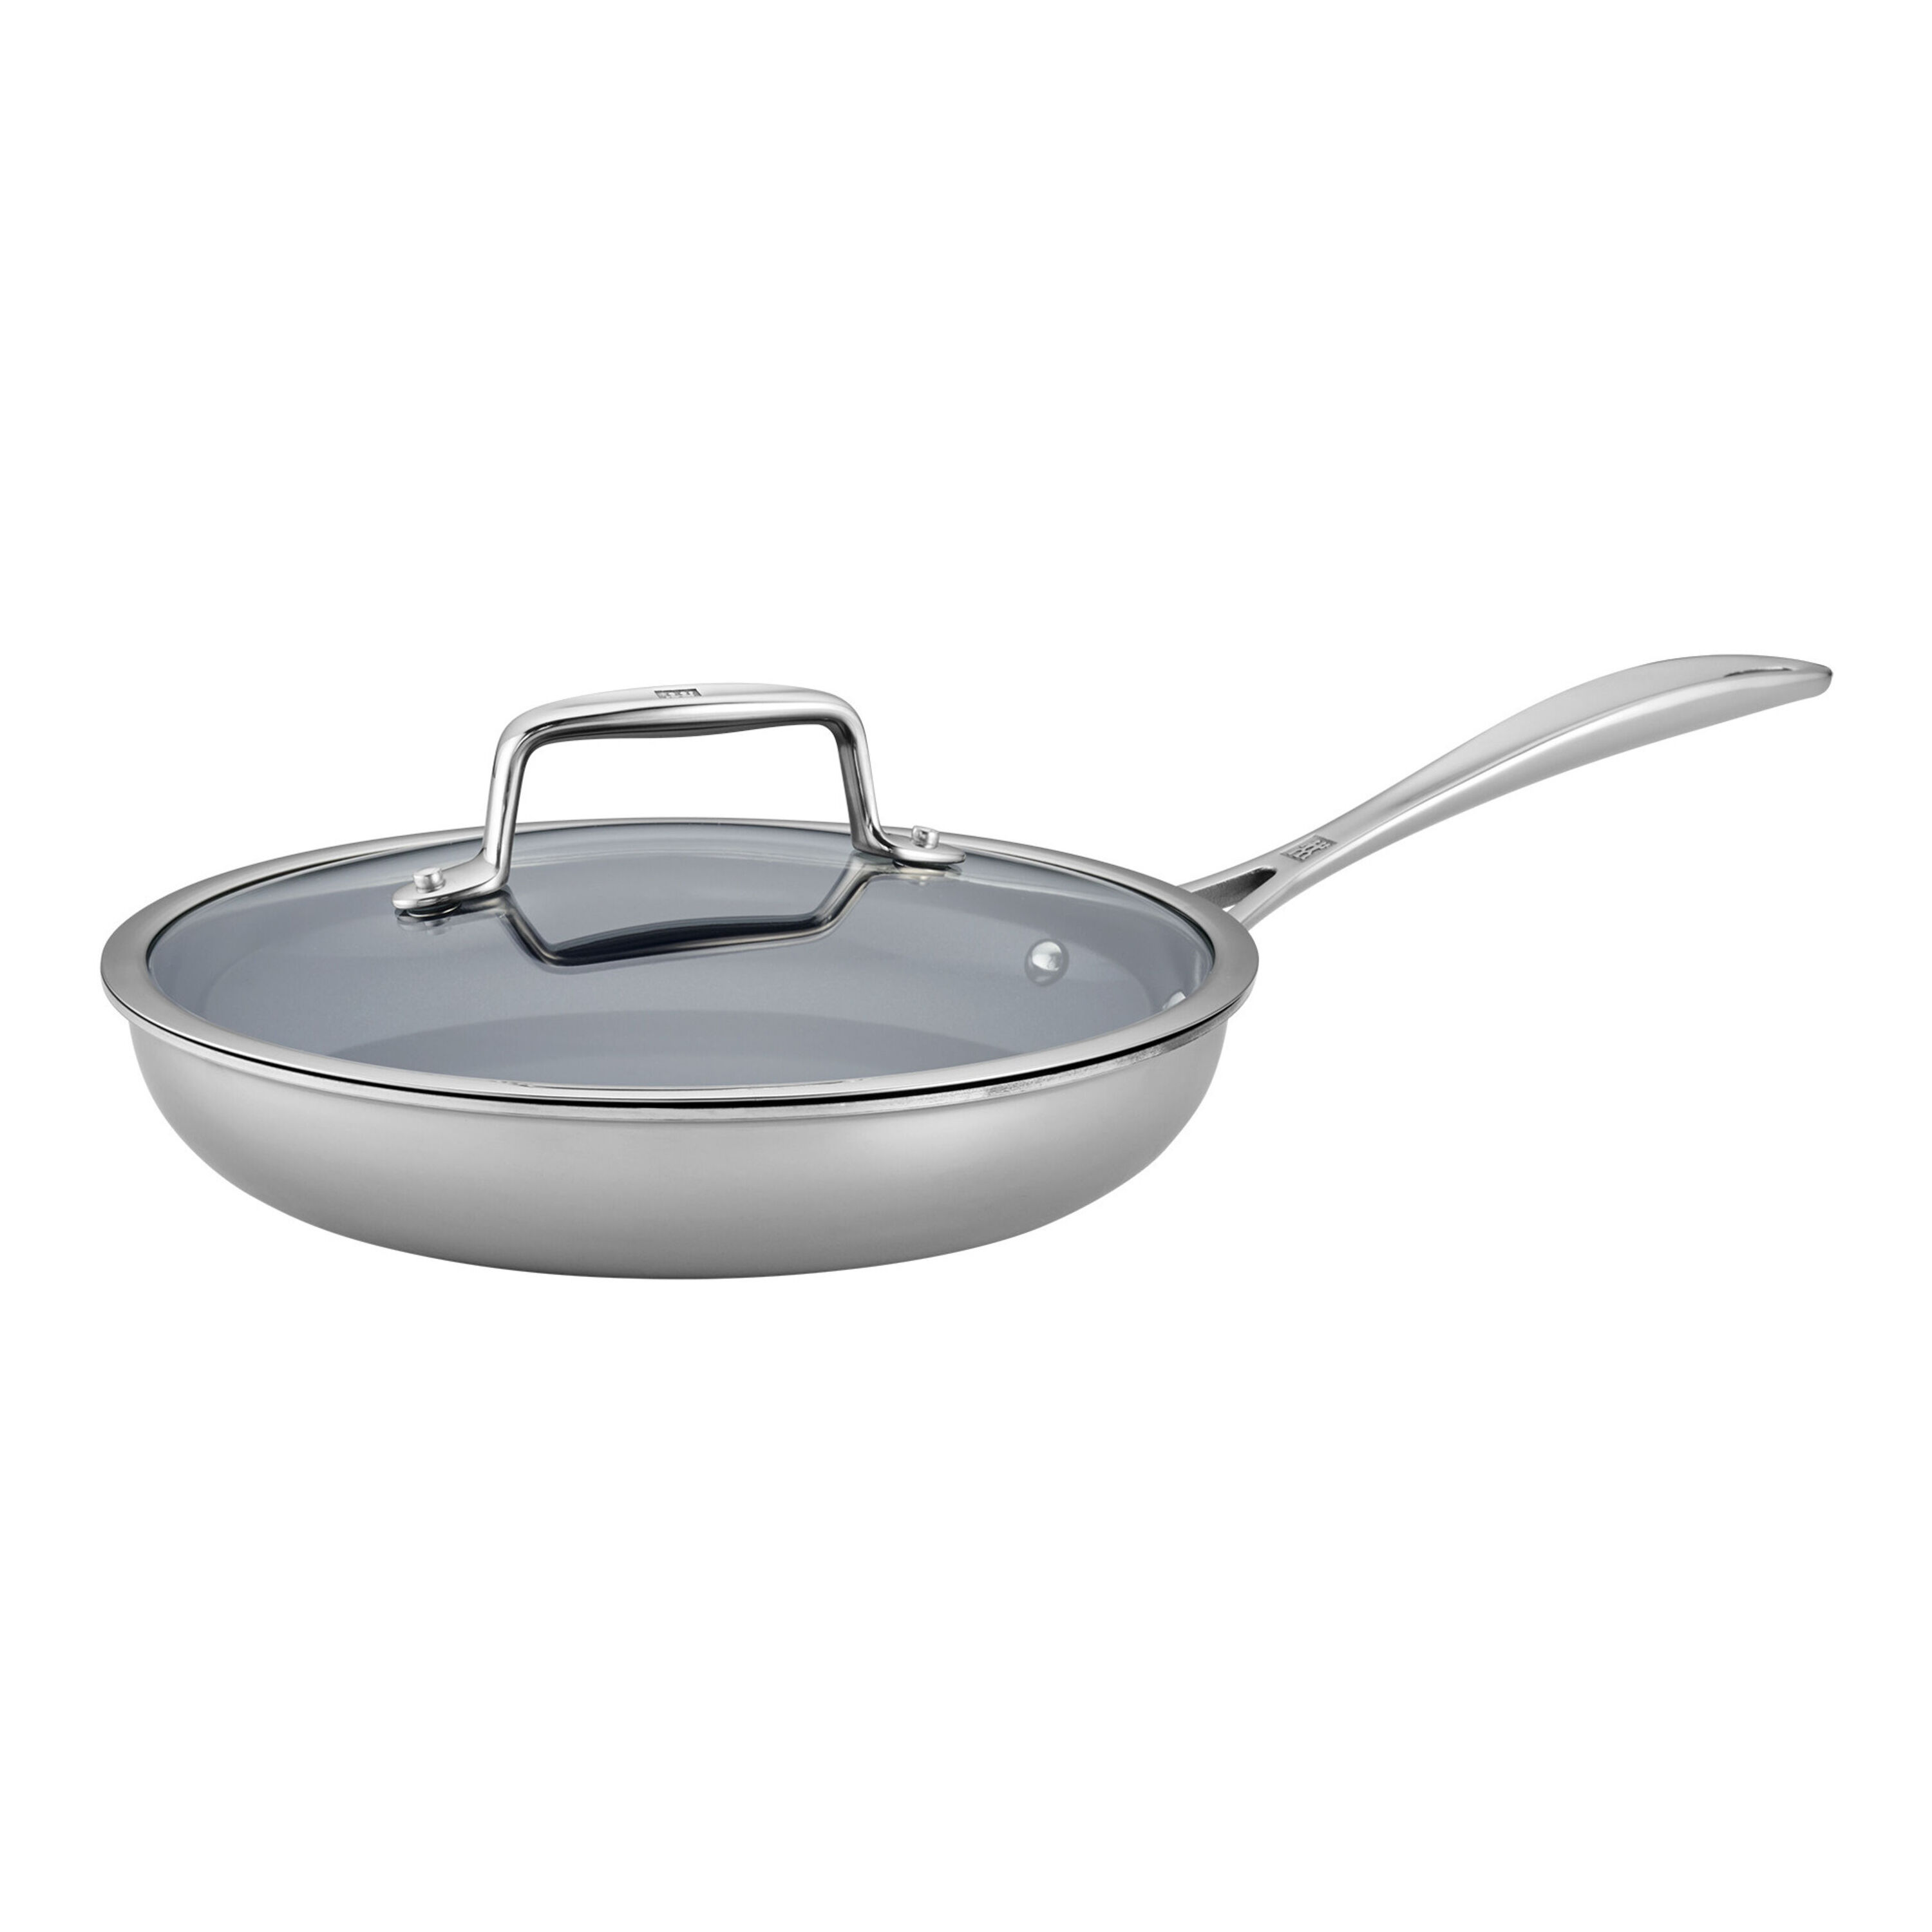 ZWILLING Energy Plus 2-pc, 18/10 Stainless Steel, Non-stick, Frying pan set